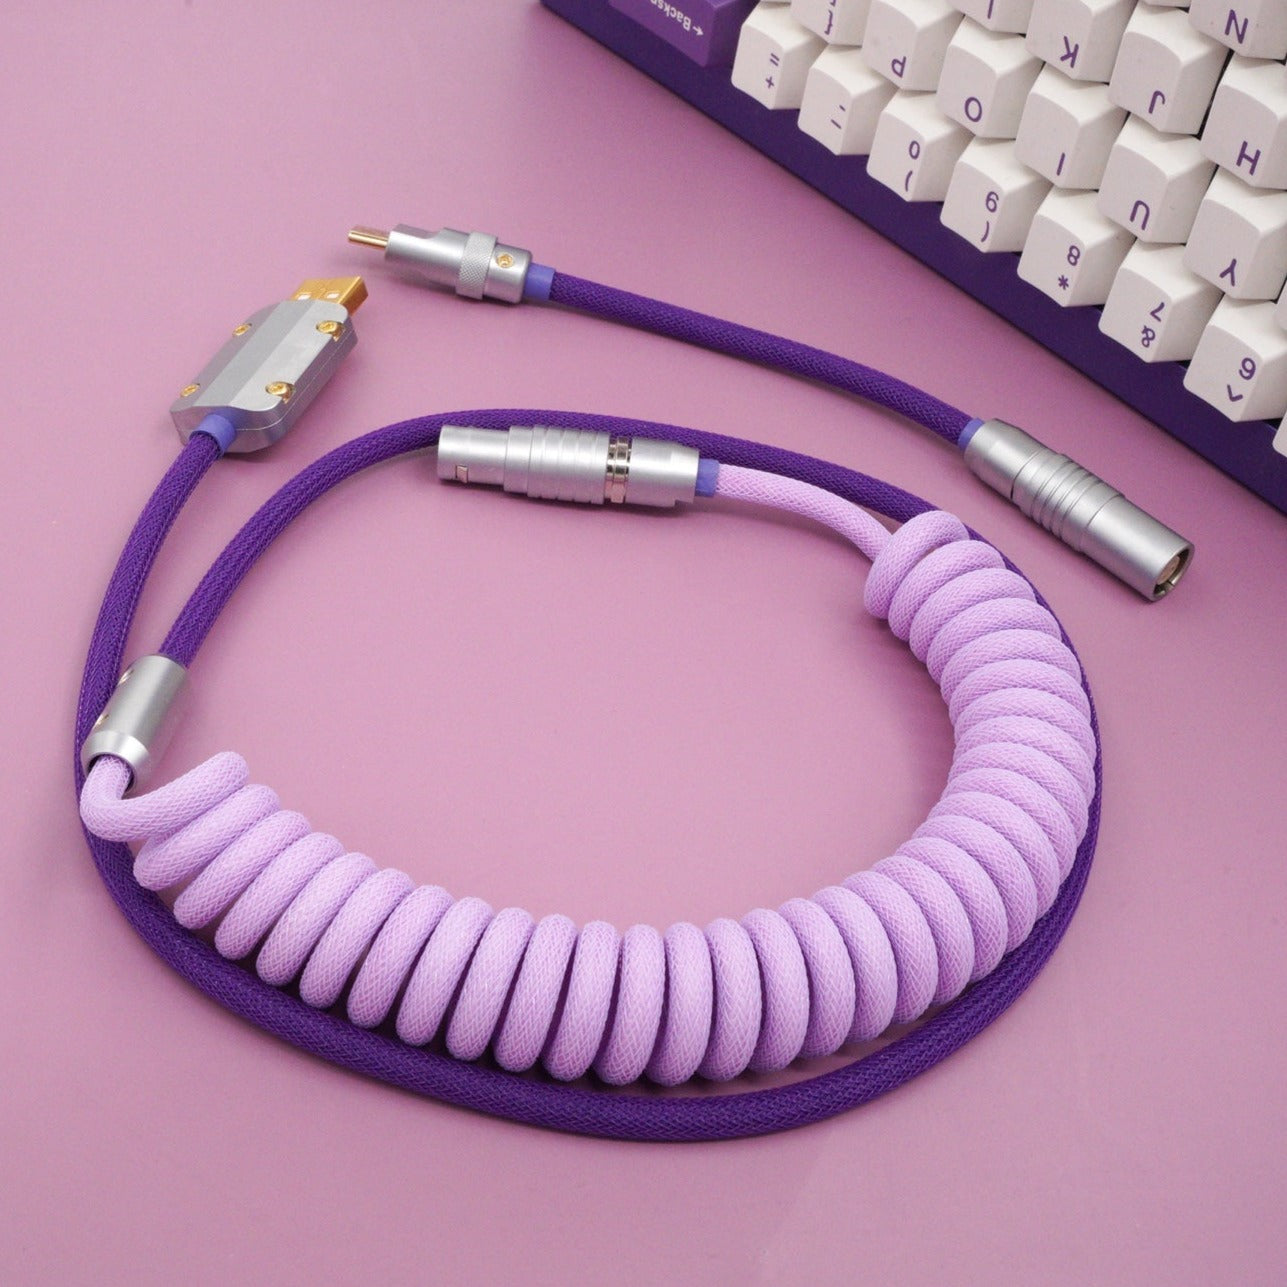 Sleeved Coiled Keyboard Aviator Cable, Lemo Style Connector - Classic Purple